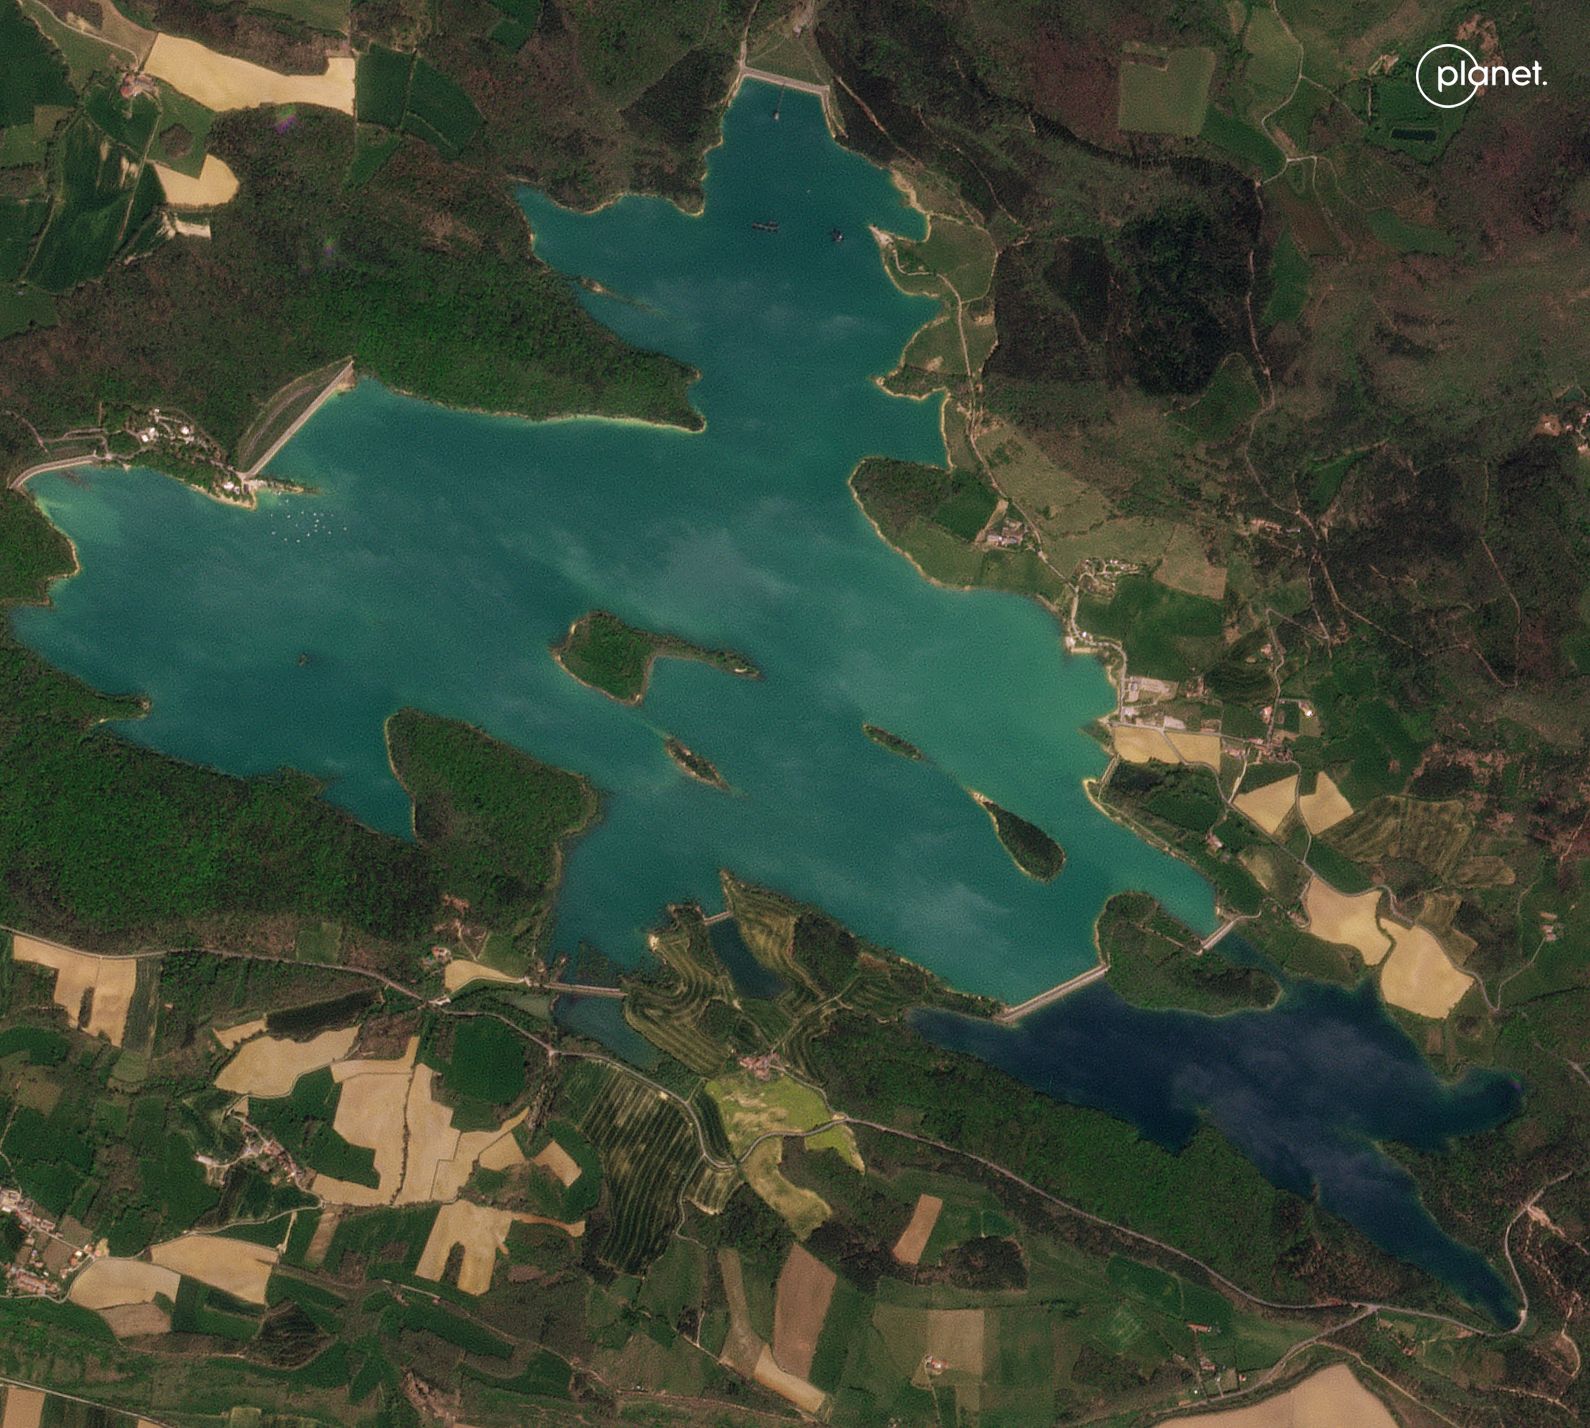 Satellite Images Highlight Extreme Drought in Europe